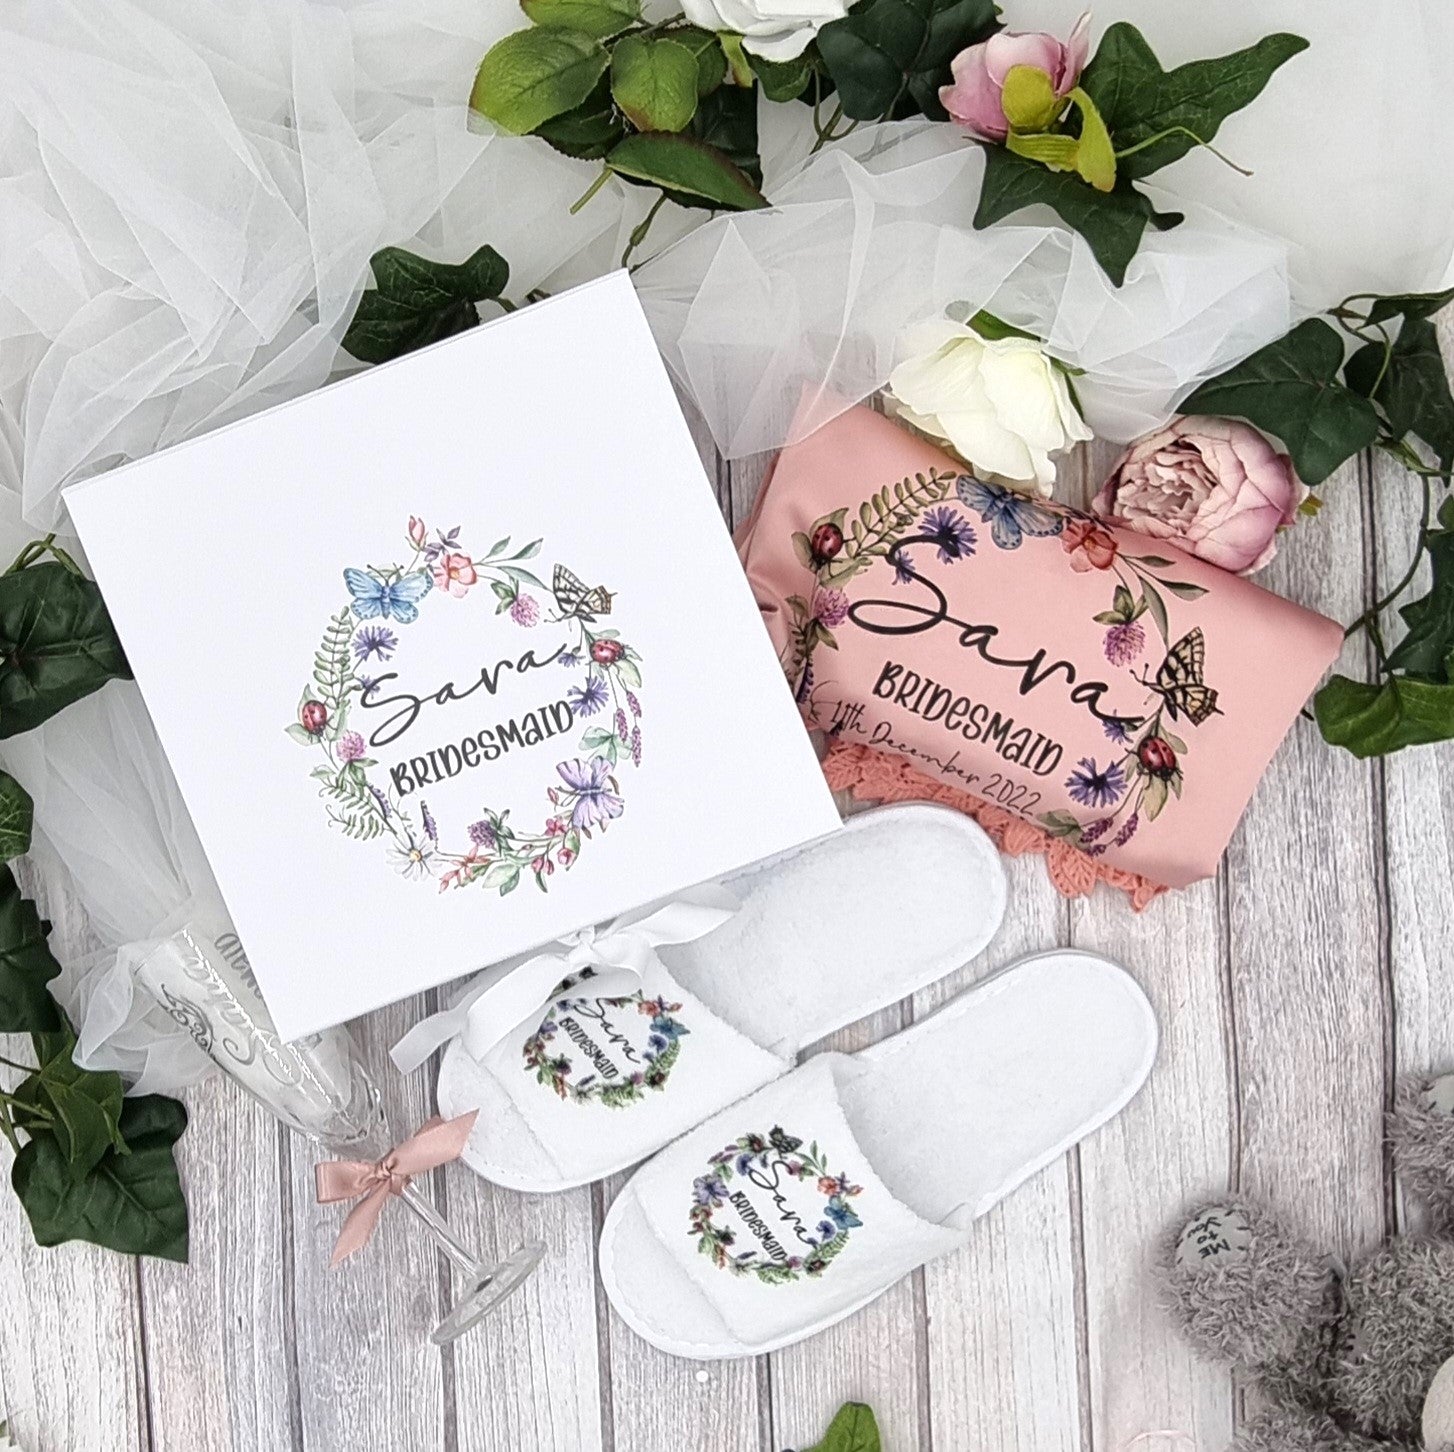 Exclusive Bridal Gift Sets with The Garter Girl and Marigold Grey